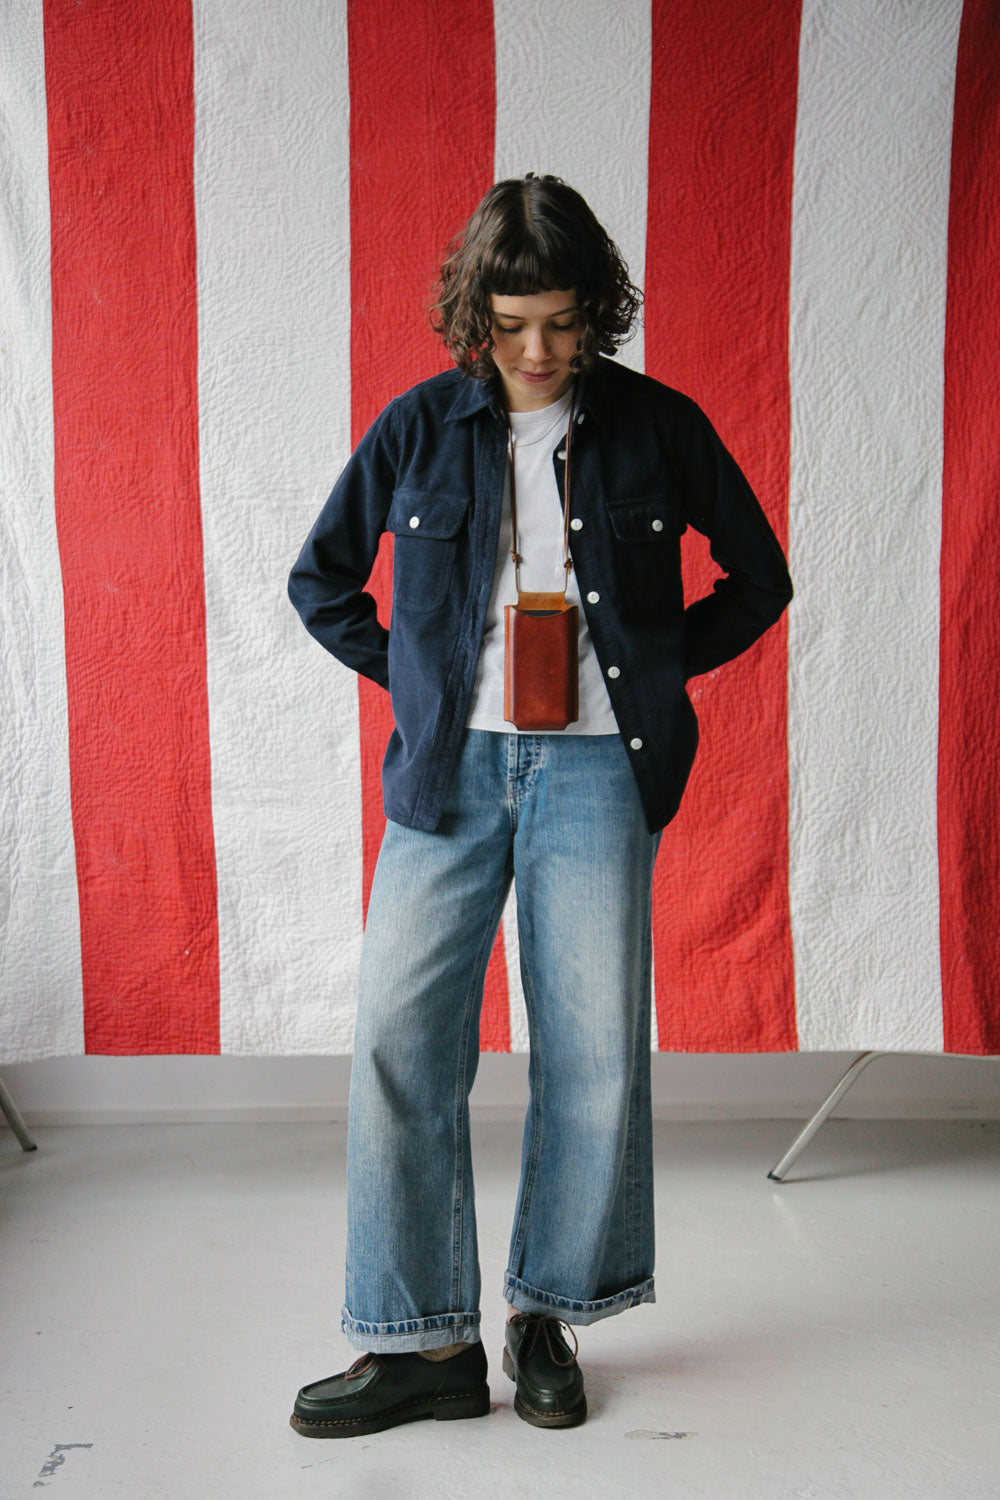 Gallery images of the Women’s French Corduroy Workshirt - French Navy